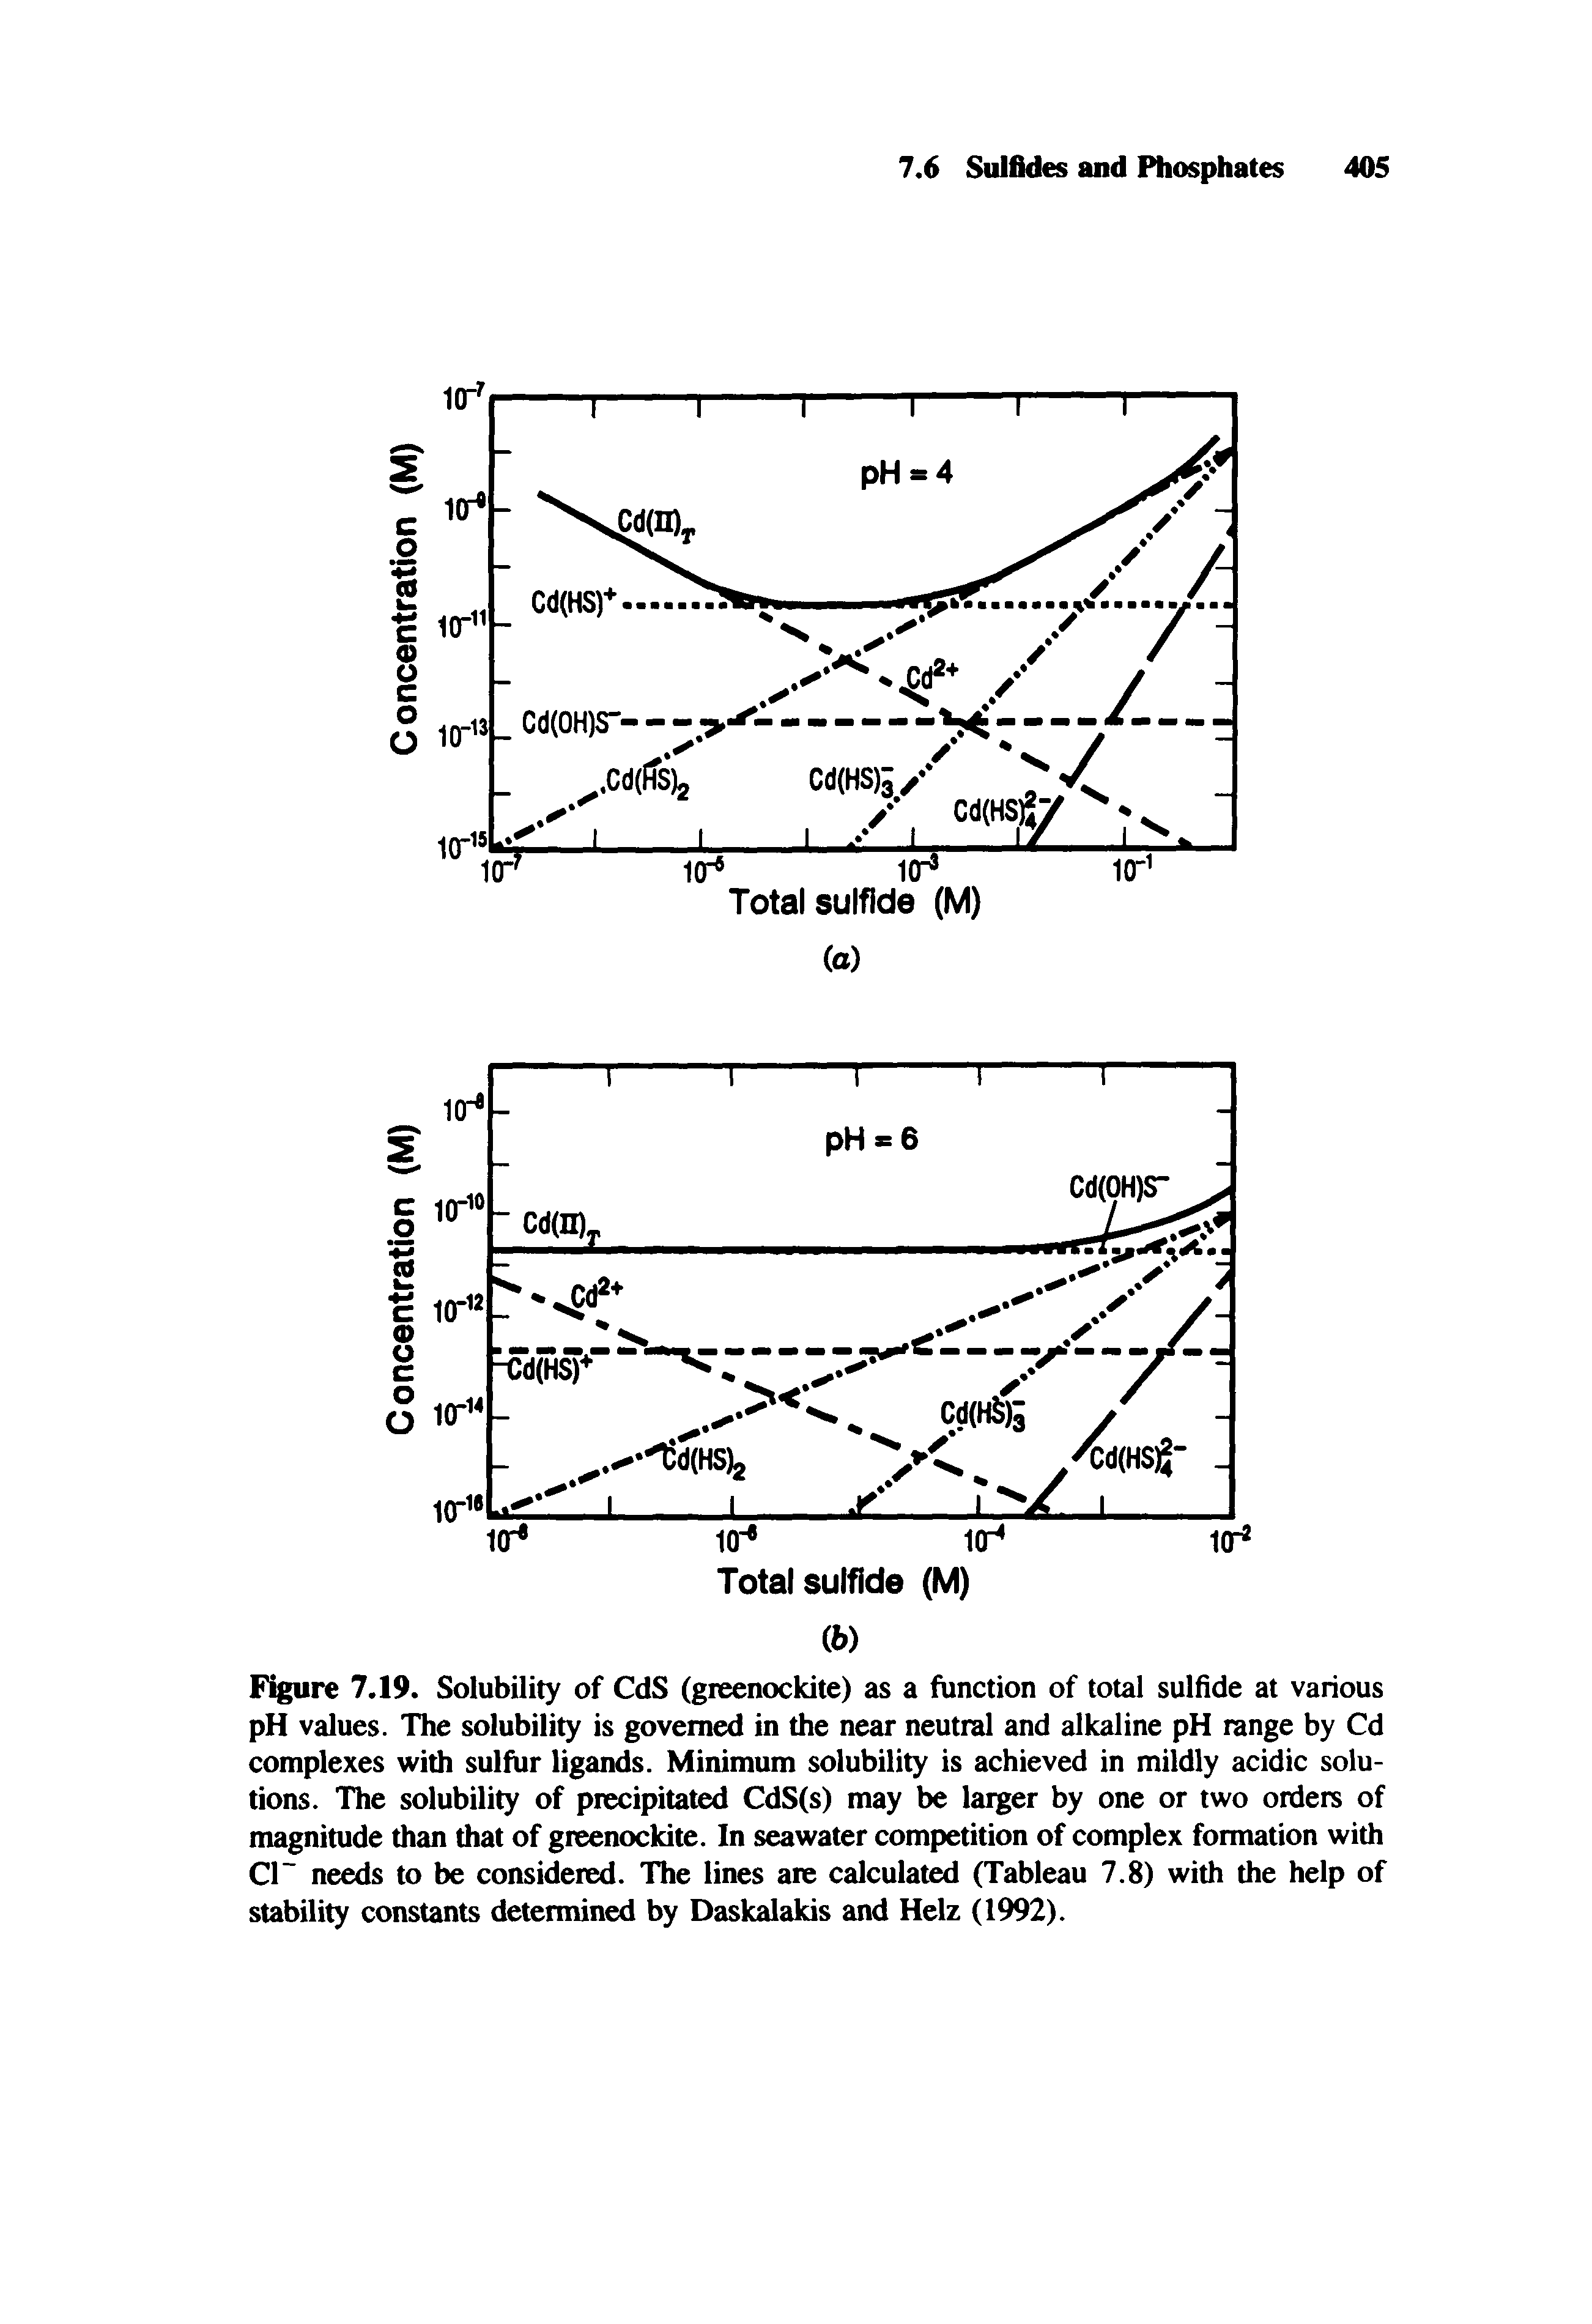 Figure 7.19. Solubility of CdS (greenockite) as a function of total sulfide at various pH values. The solubility is governed in the near neutral and alkaline pH range by Cd complexes with sulfur ligands. Minimum solubility is achieved in mildly acidic solutions. The solubility of precipitated CdS(s) may be larger by one or two orders of magnitude than that of greenockite. In seawater competition of complex formation with Cl needs to be considered. The lines are calculated (Tableau 7.8) with the help of stability constants determined by Daskalakis and Hclz (1992).